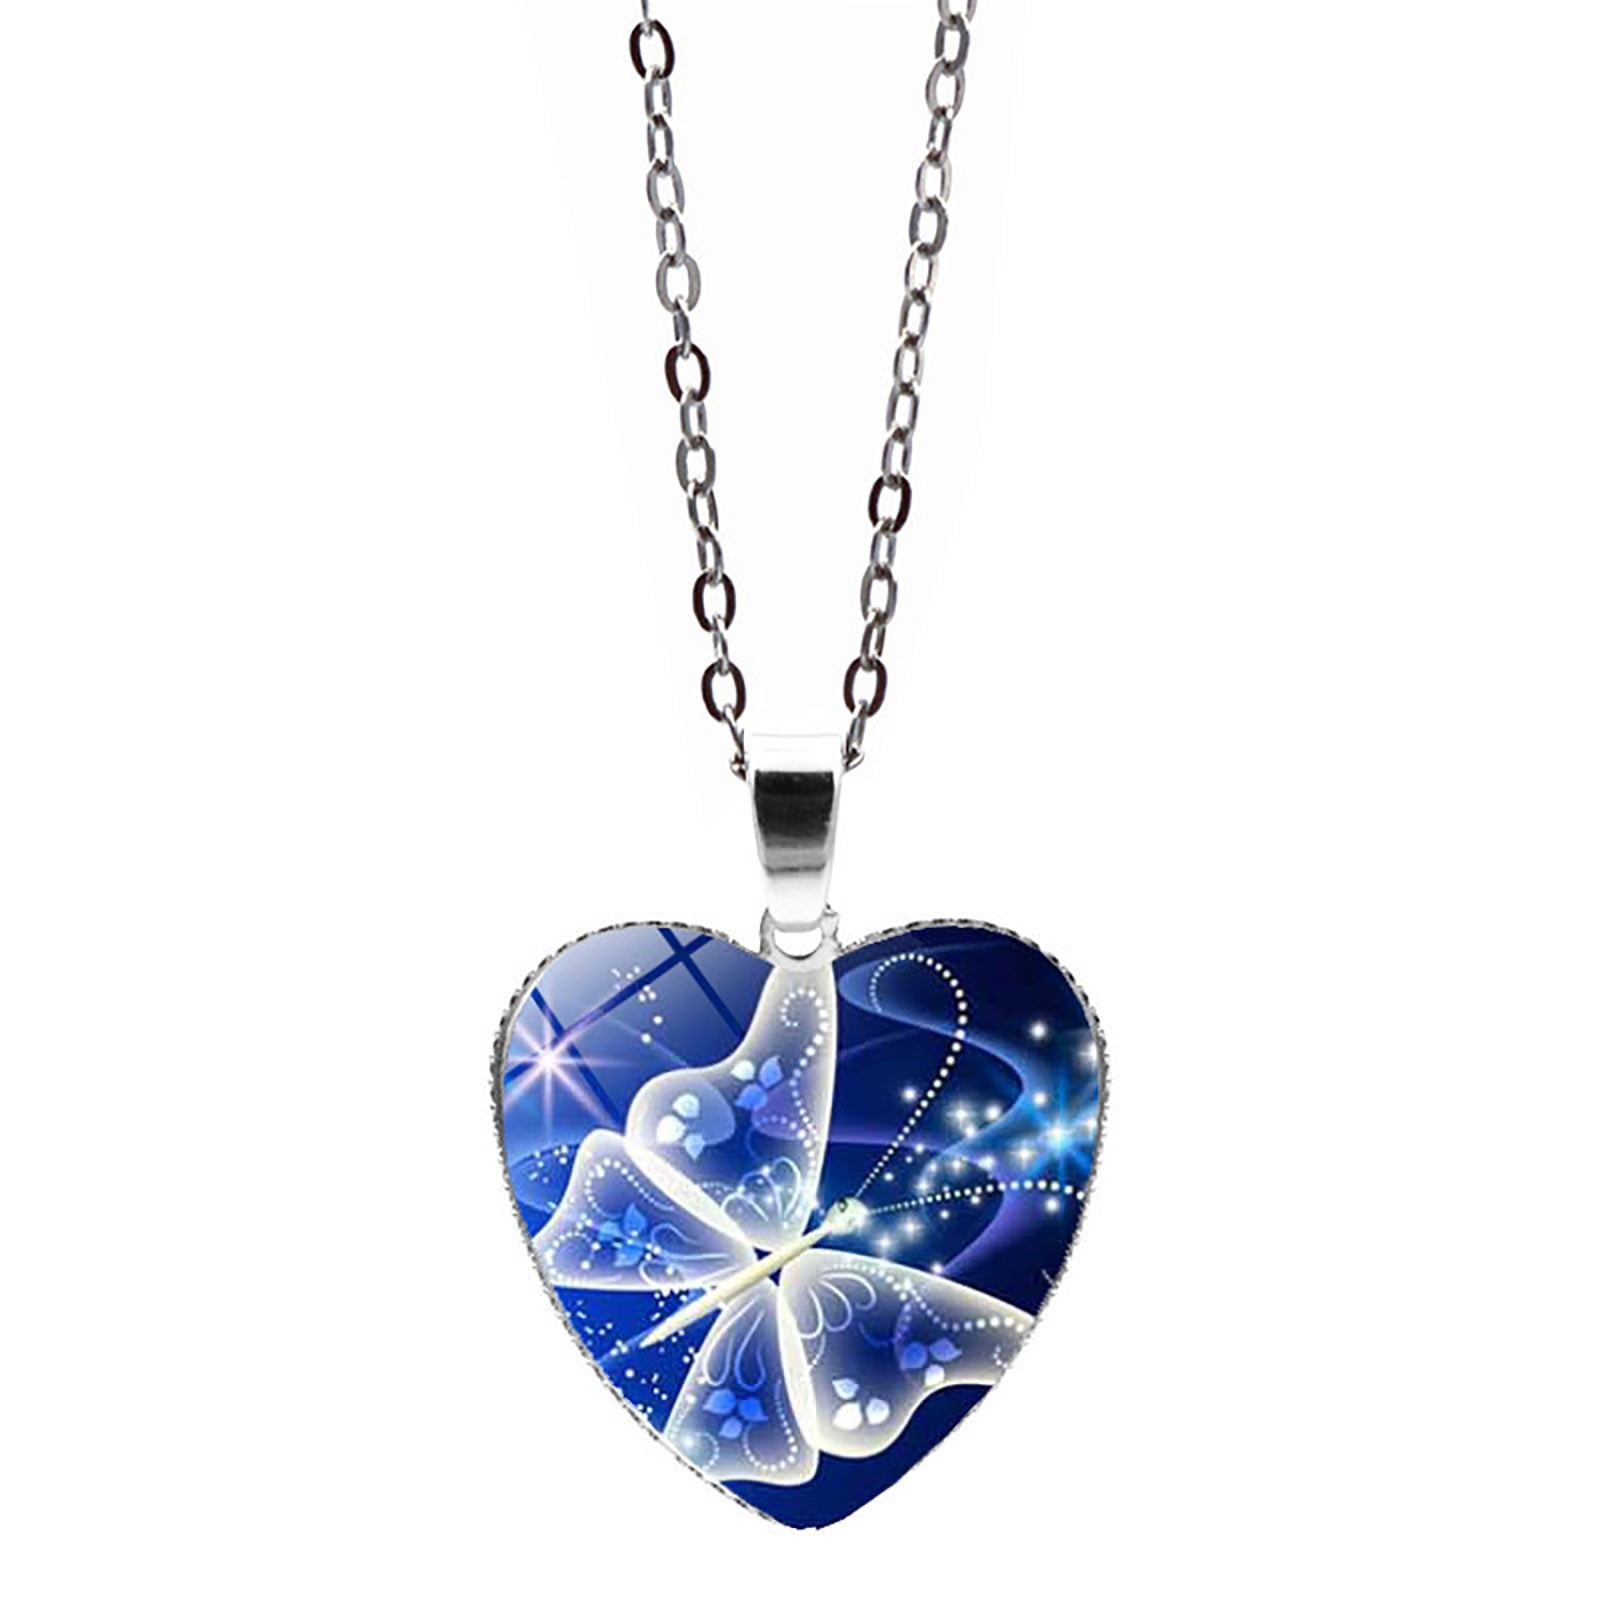 Glass Crystal Heart Pendant Necklace chain 20mm sparkle gift womens 16"